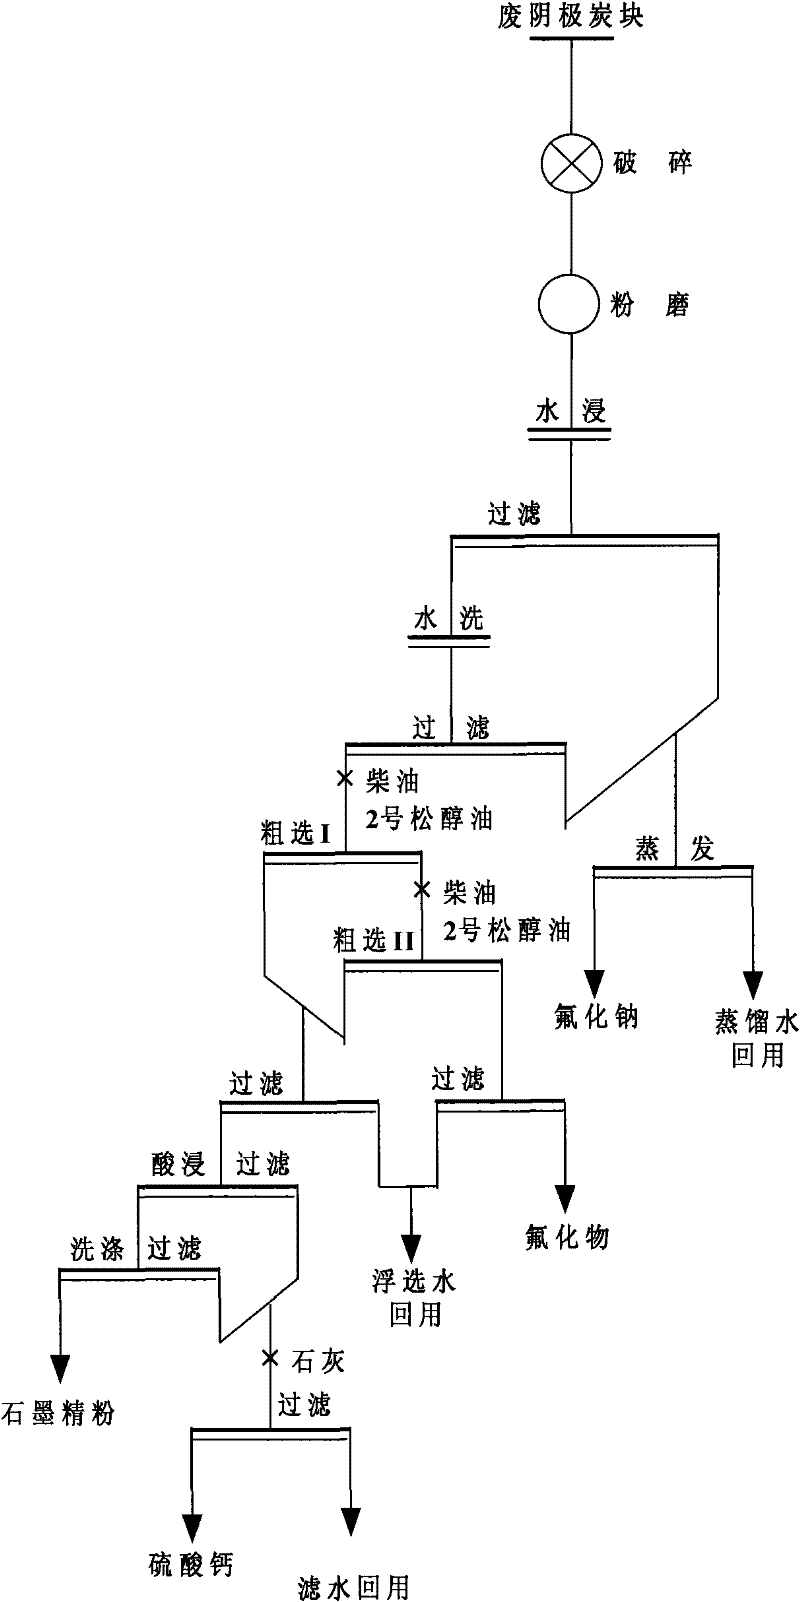 Method for recovering graphite from waste cathode carbon blocks in electrolytic aluminium production